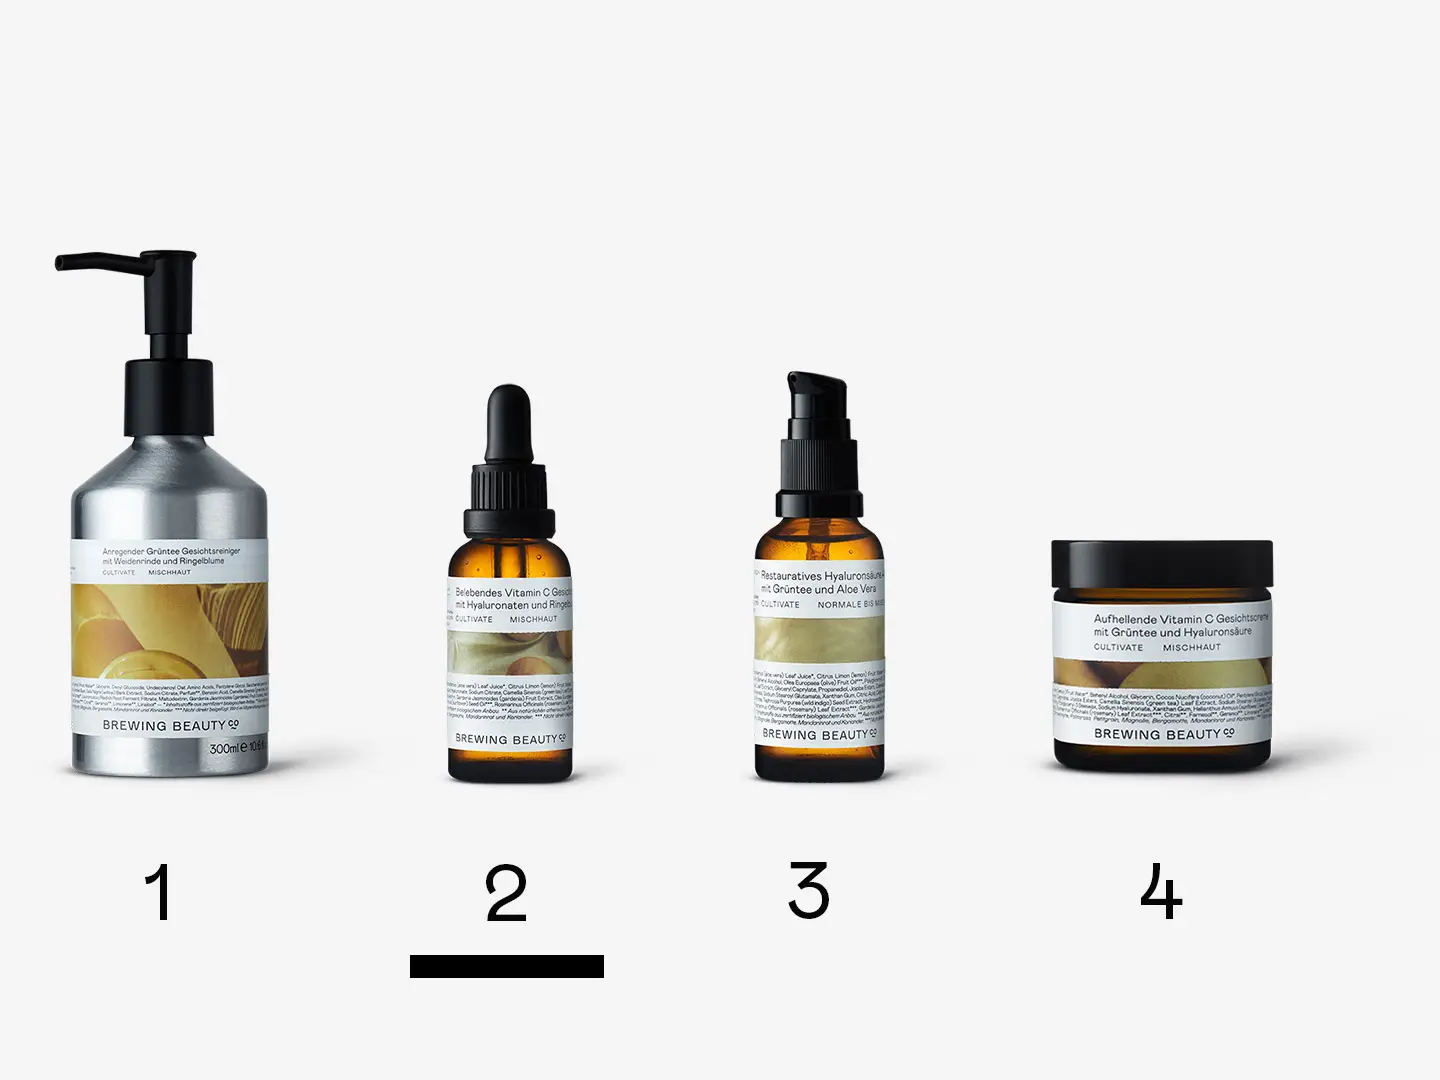 A lineup of Brewing Beauty products representing Routine No.51 